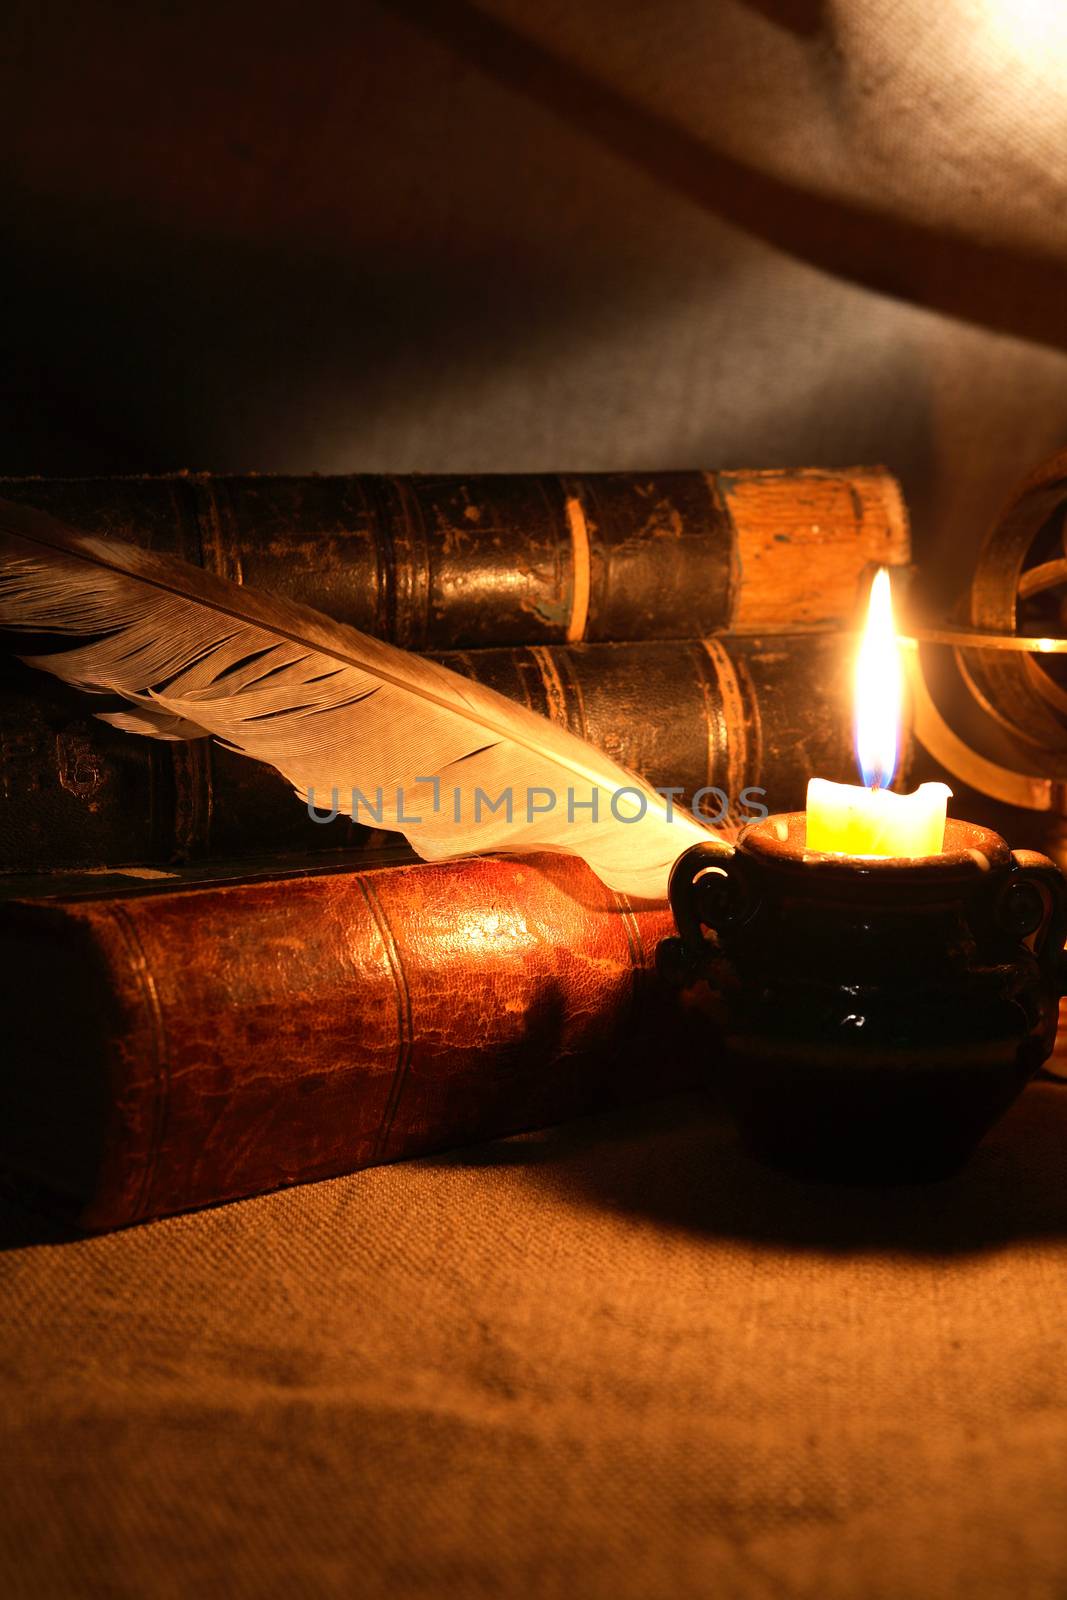 Vintage still life with quill pen near lighting candle and books